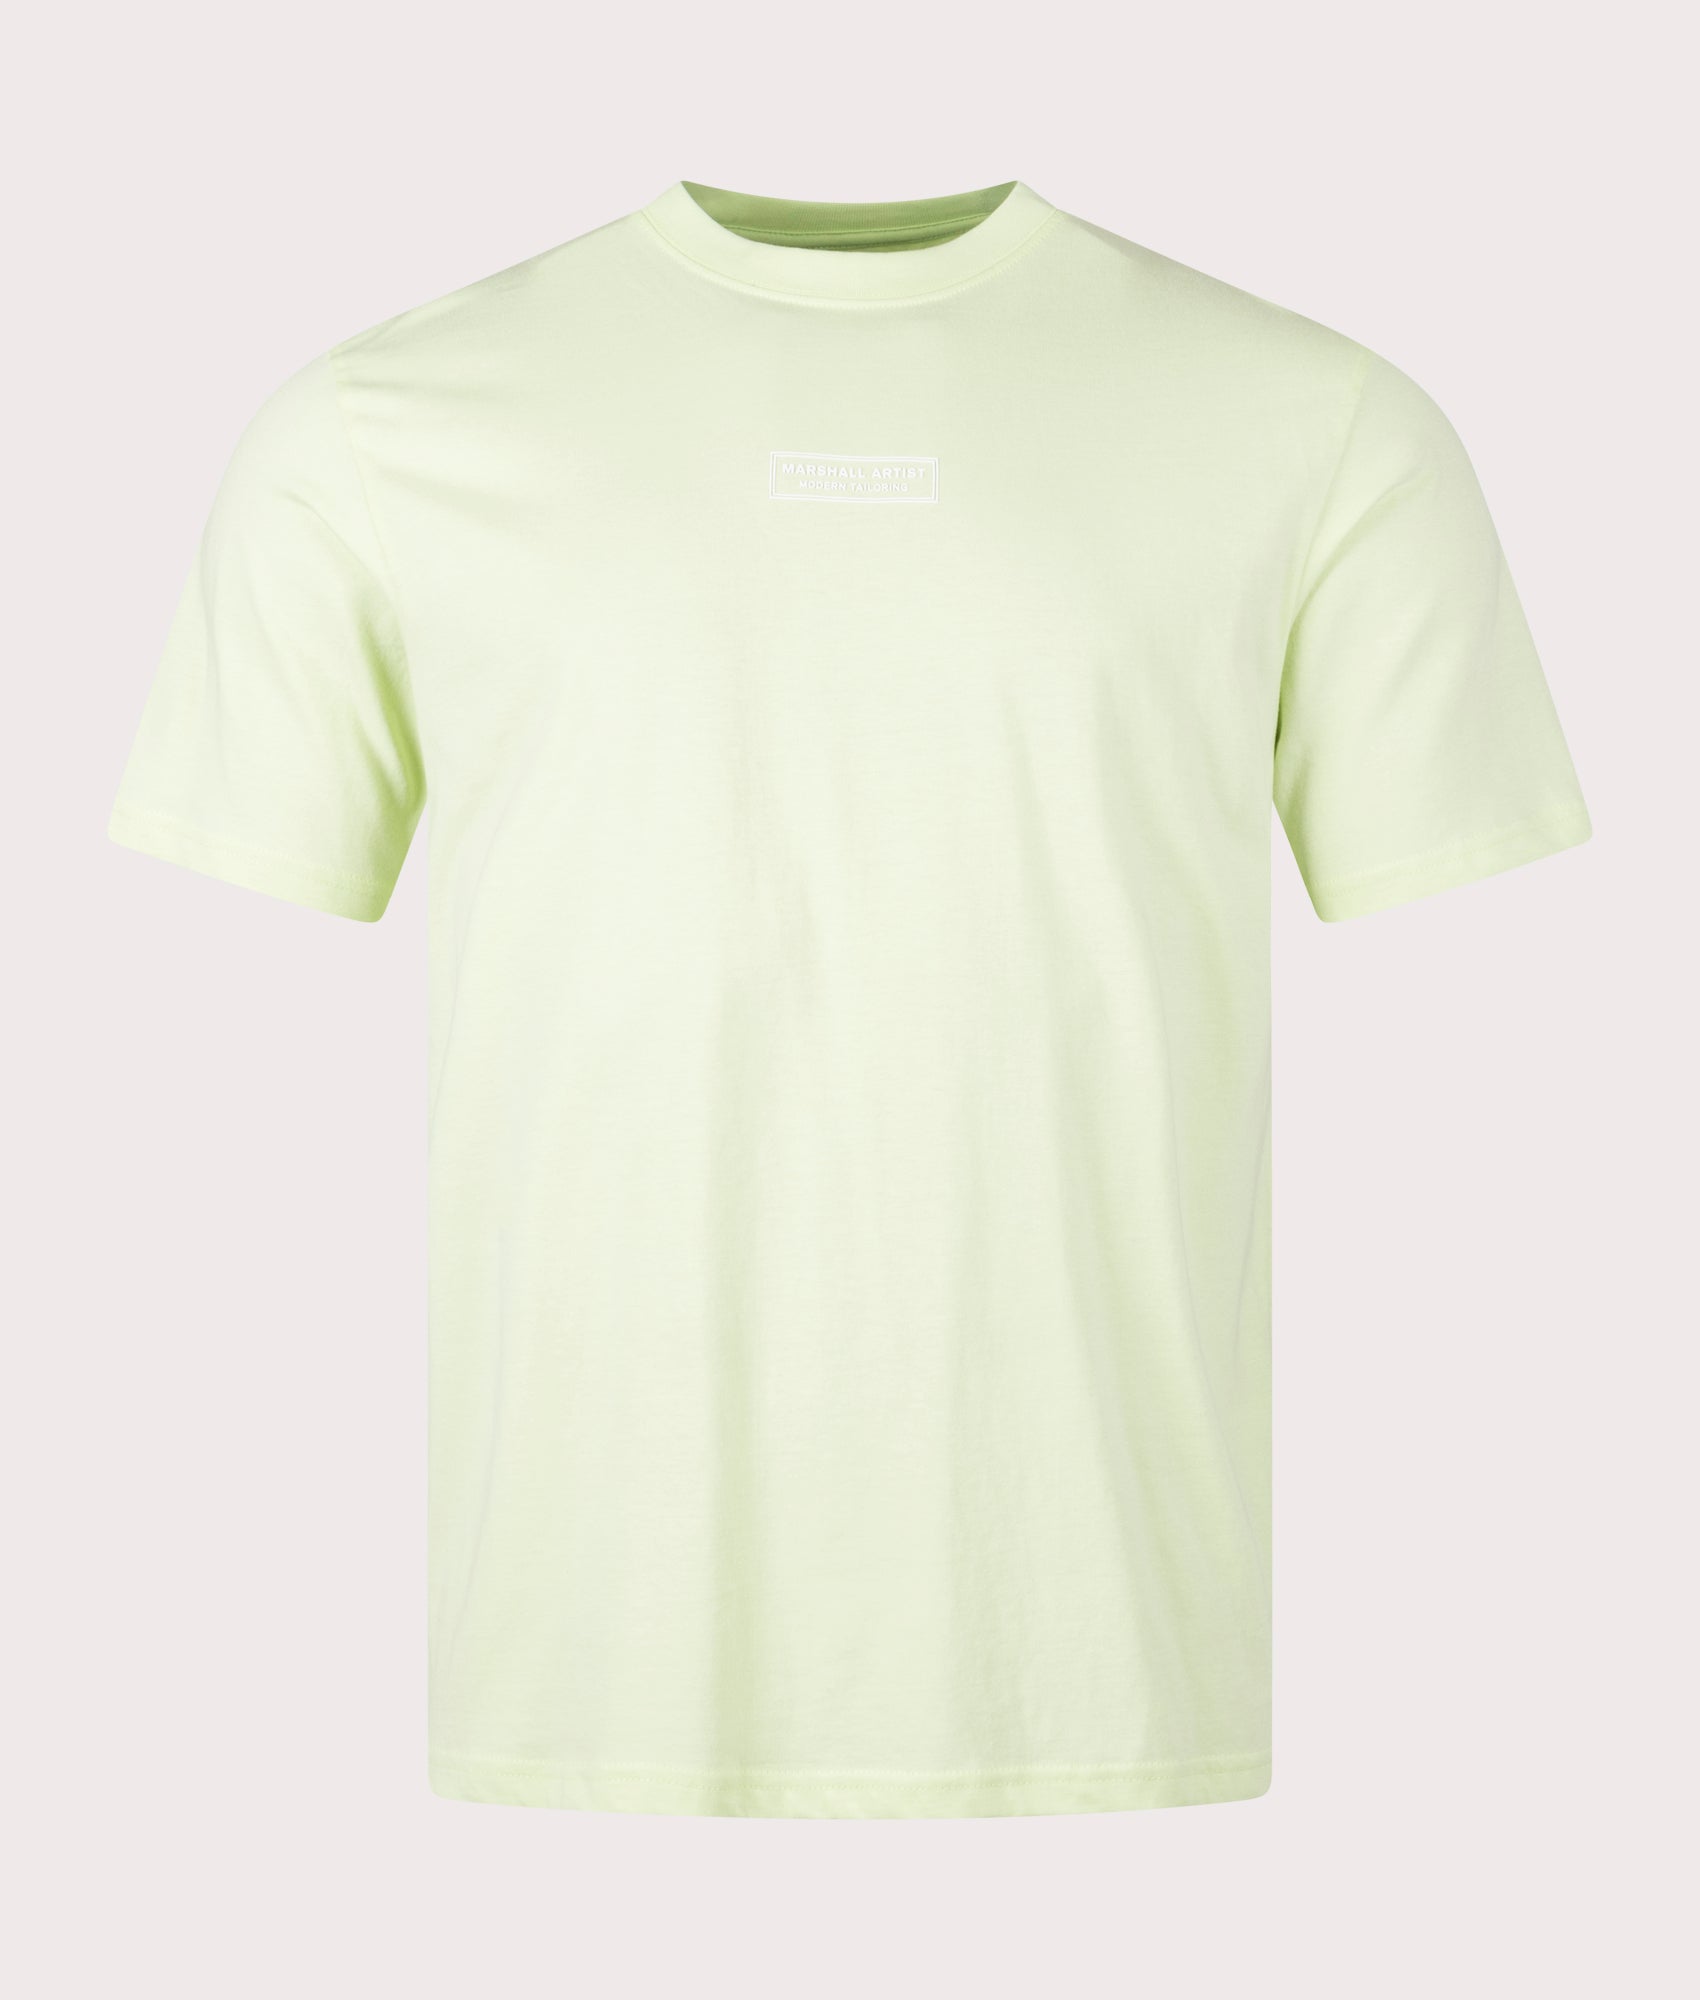 Marshall Artist Mens Injection T-Shirt - Colour: 073 Lime - Size: Small